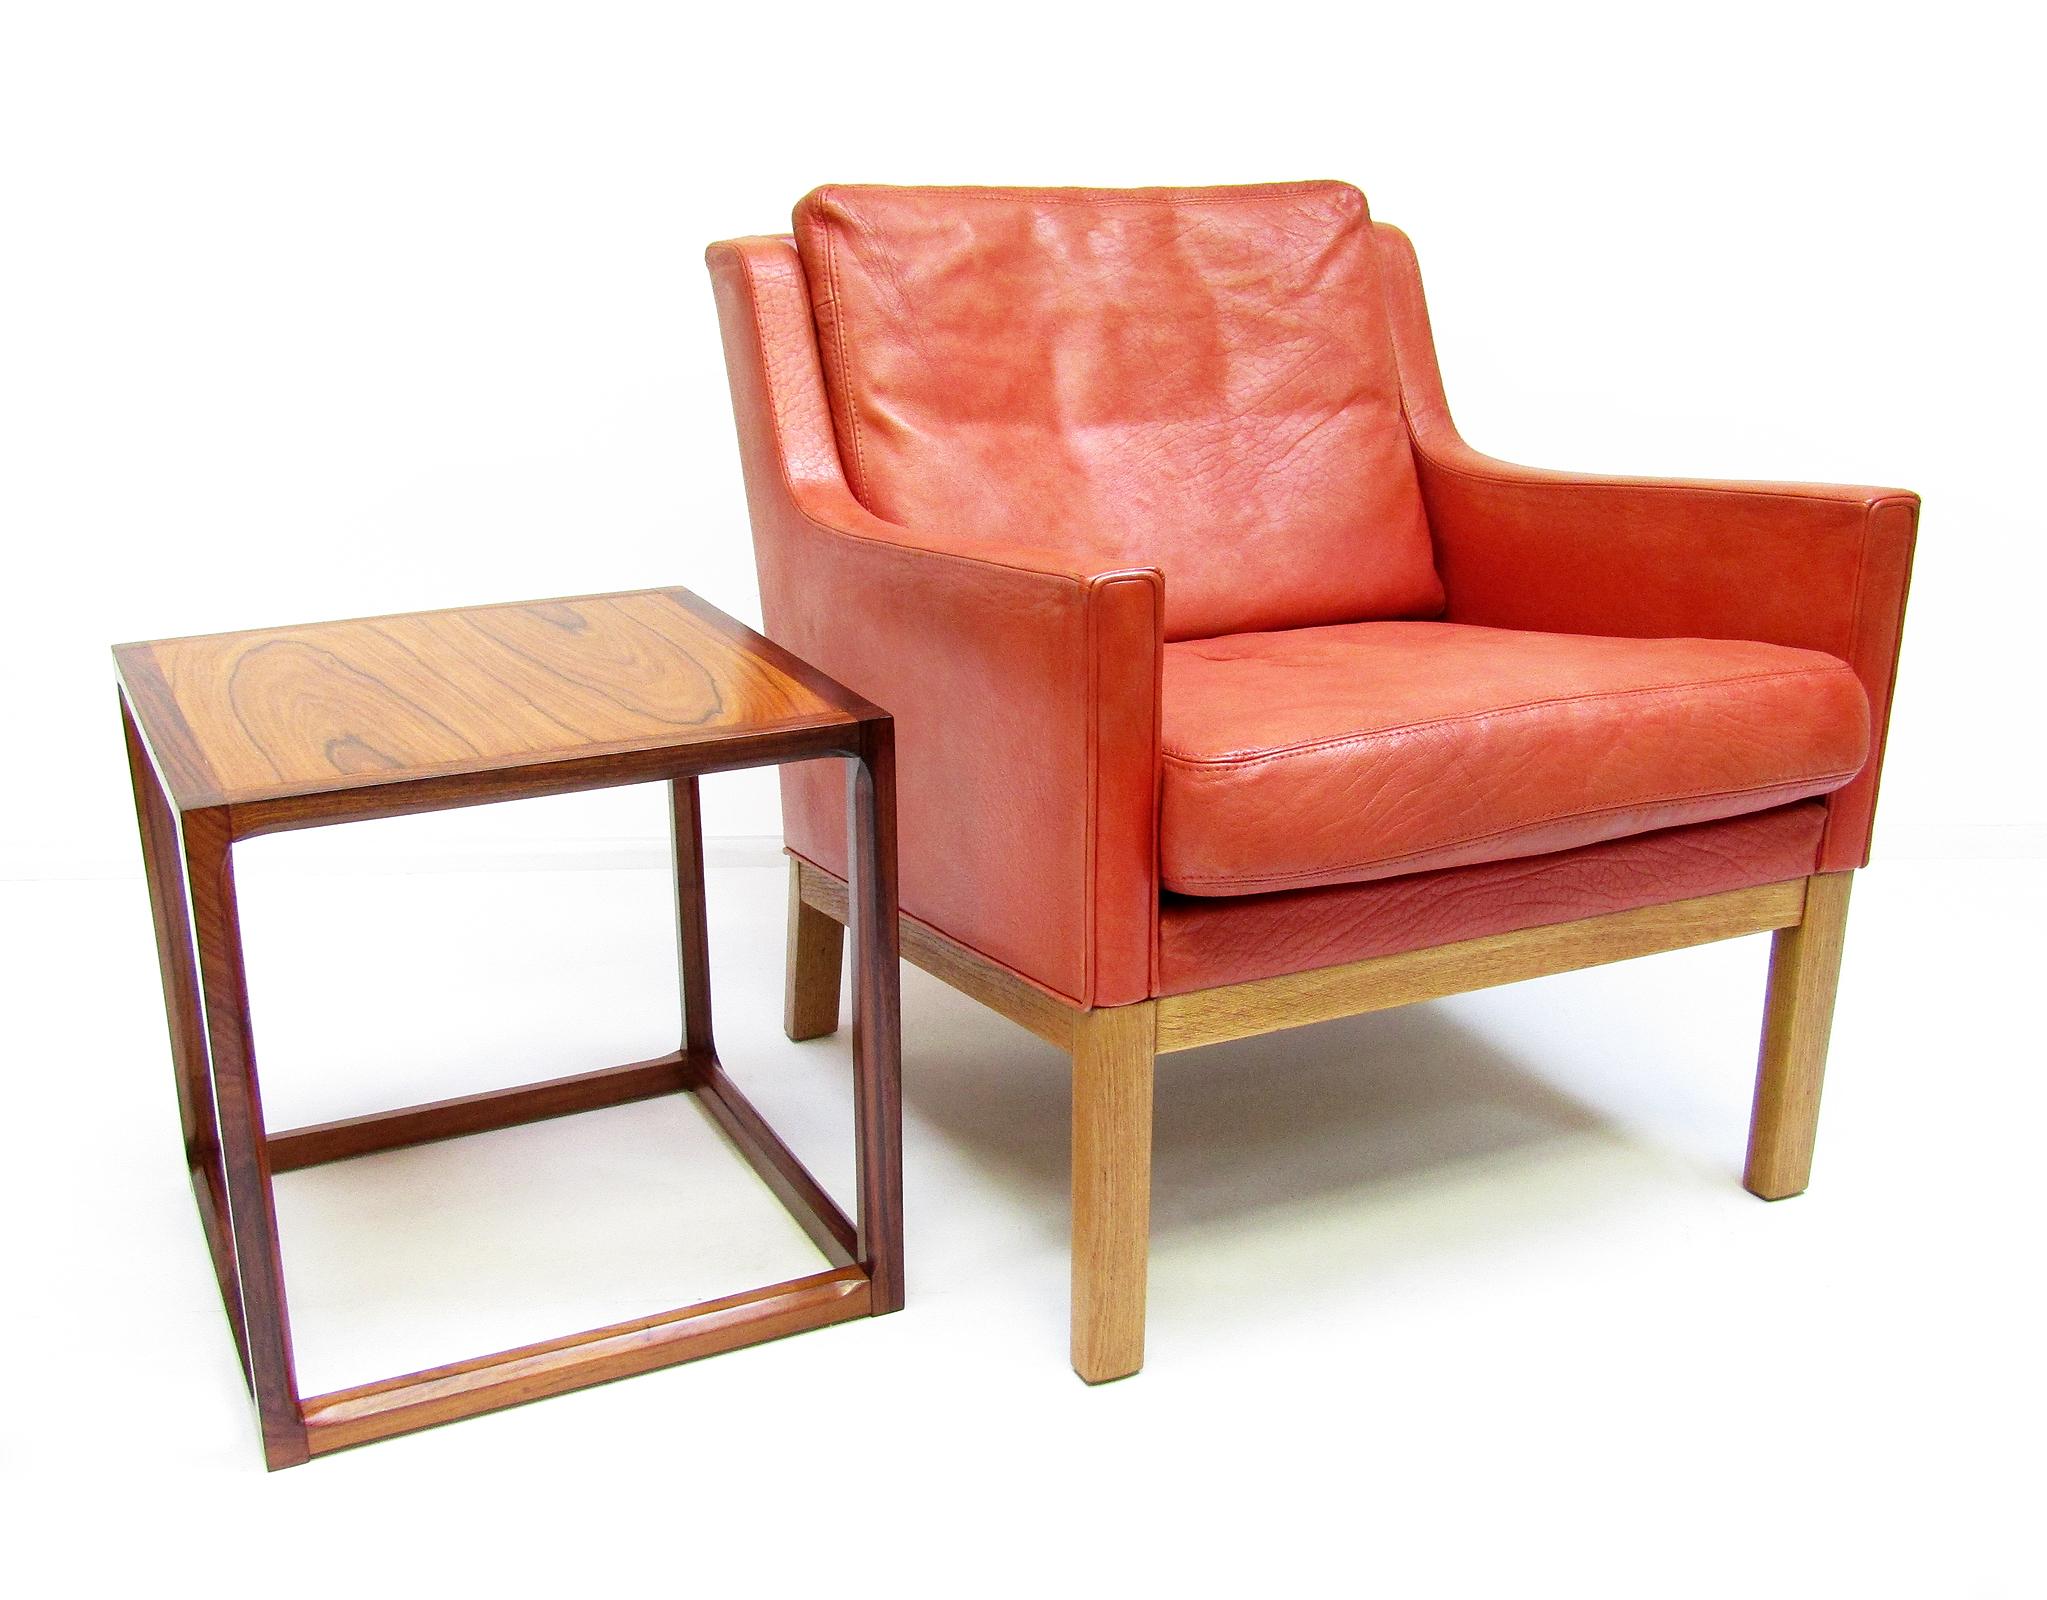 20th Century Pair of Danish Rosewood 1960s Cube Lamp Tables / Nightstands by Kai Kristiansen For Sale